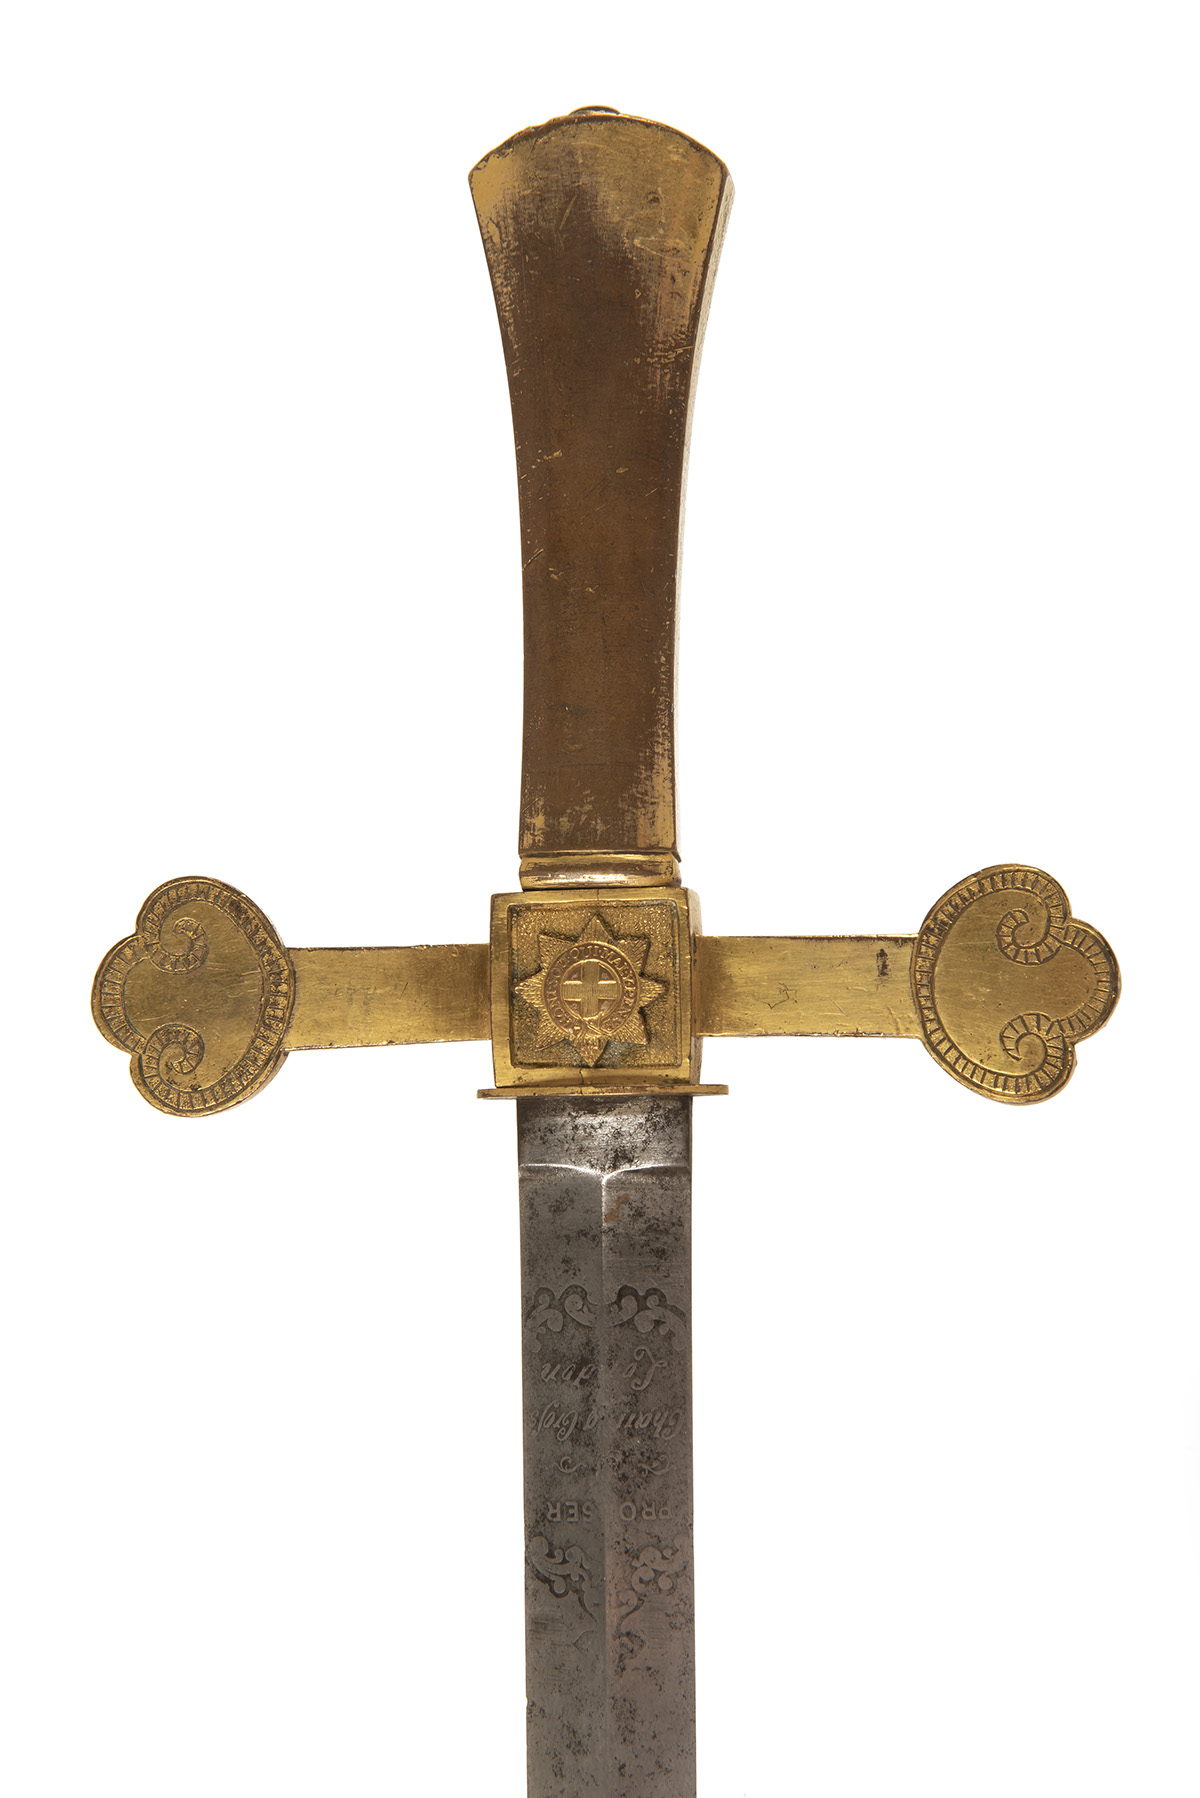 A RARE SWORD FOR THE 'KNIGHTS OF WINDSOR' SIGNED PROSSER, LONDON, specifically the Coldstream Guards - Image 2 of 3